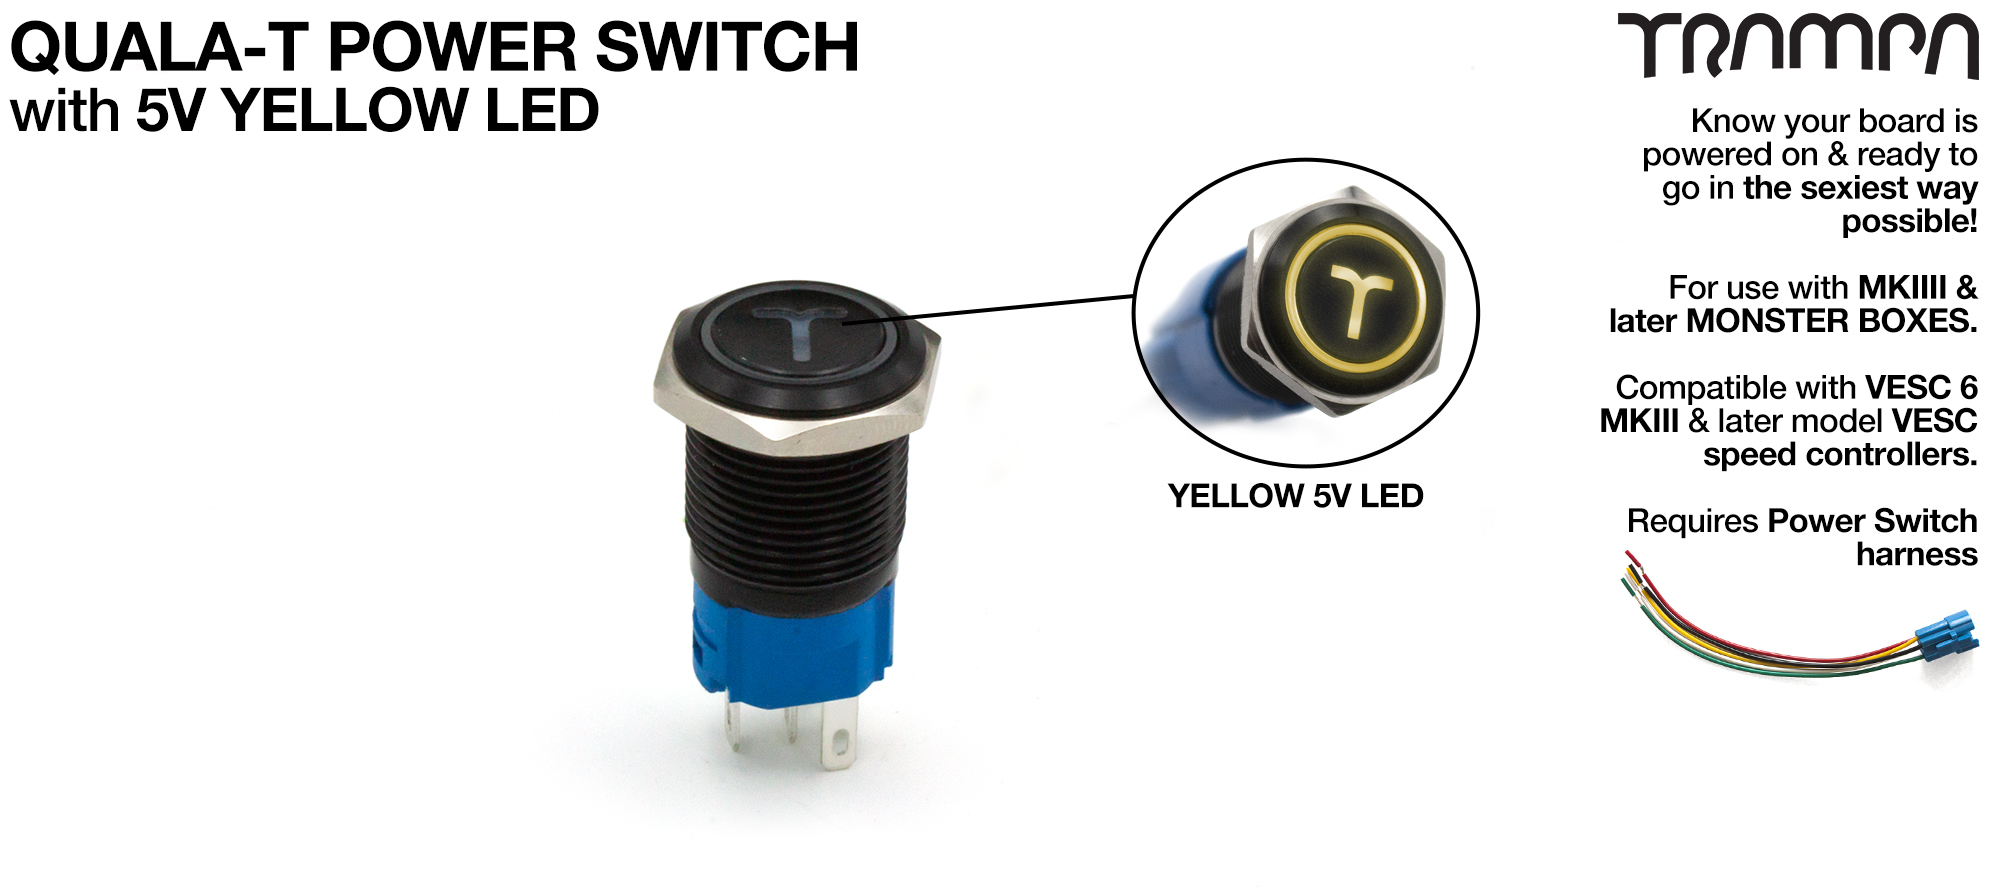 TRAMPA Switch with 5V YELLOW LED QUALA-T & 16mm Stainless Steel Fixing Nut 